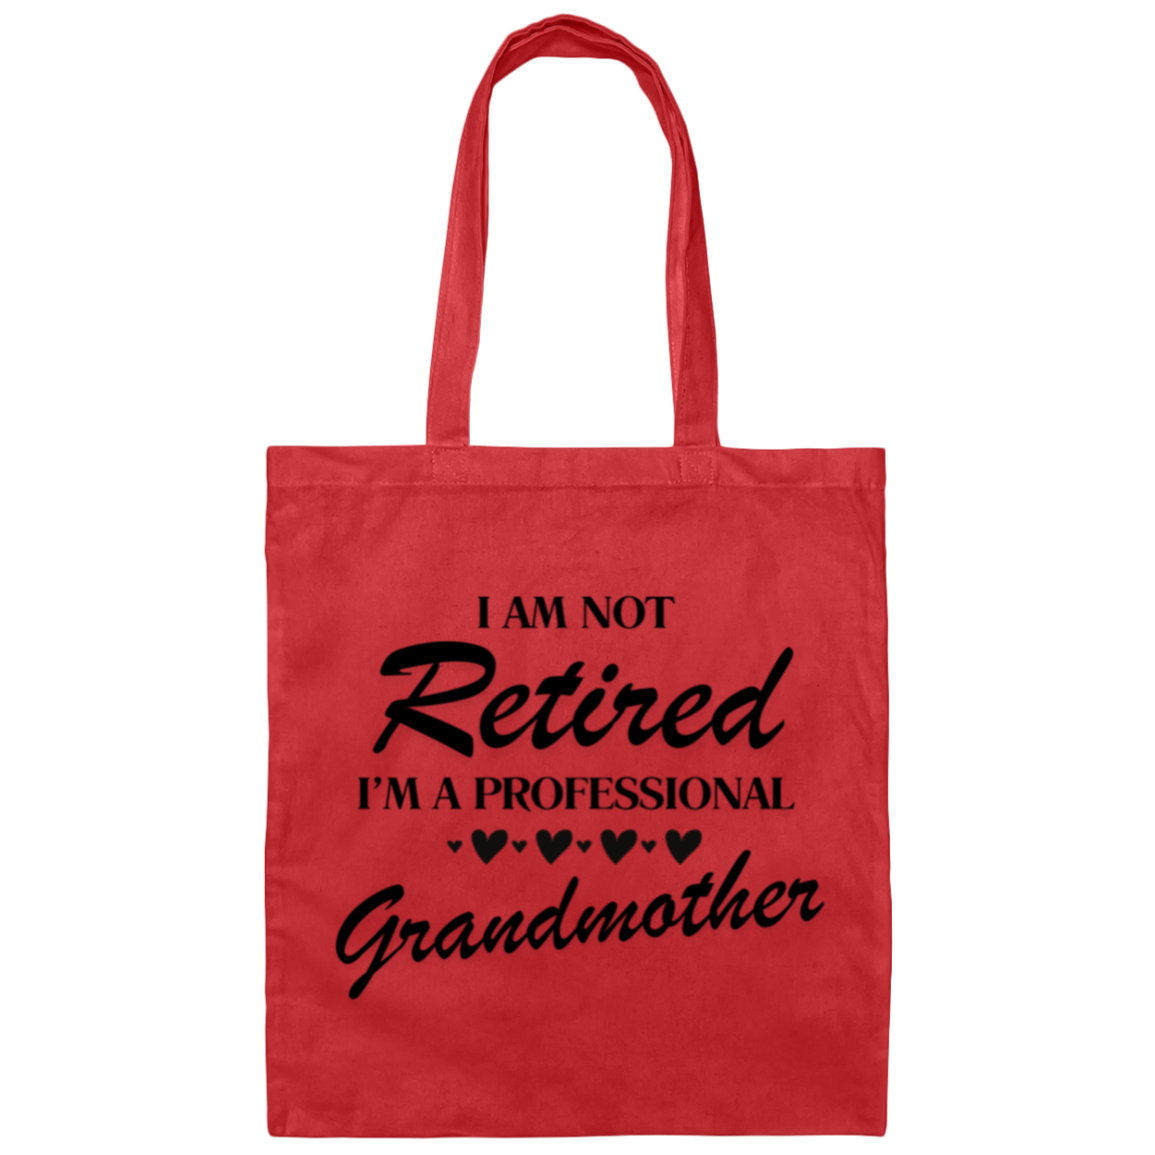 Retired Prof Grandmother - Tote Bag